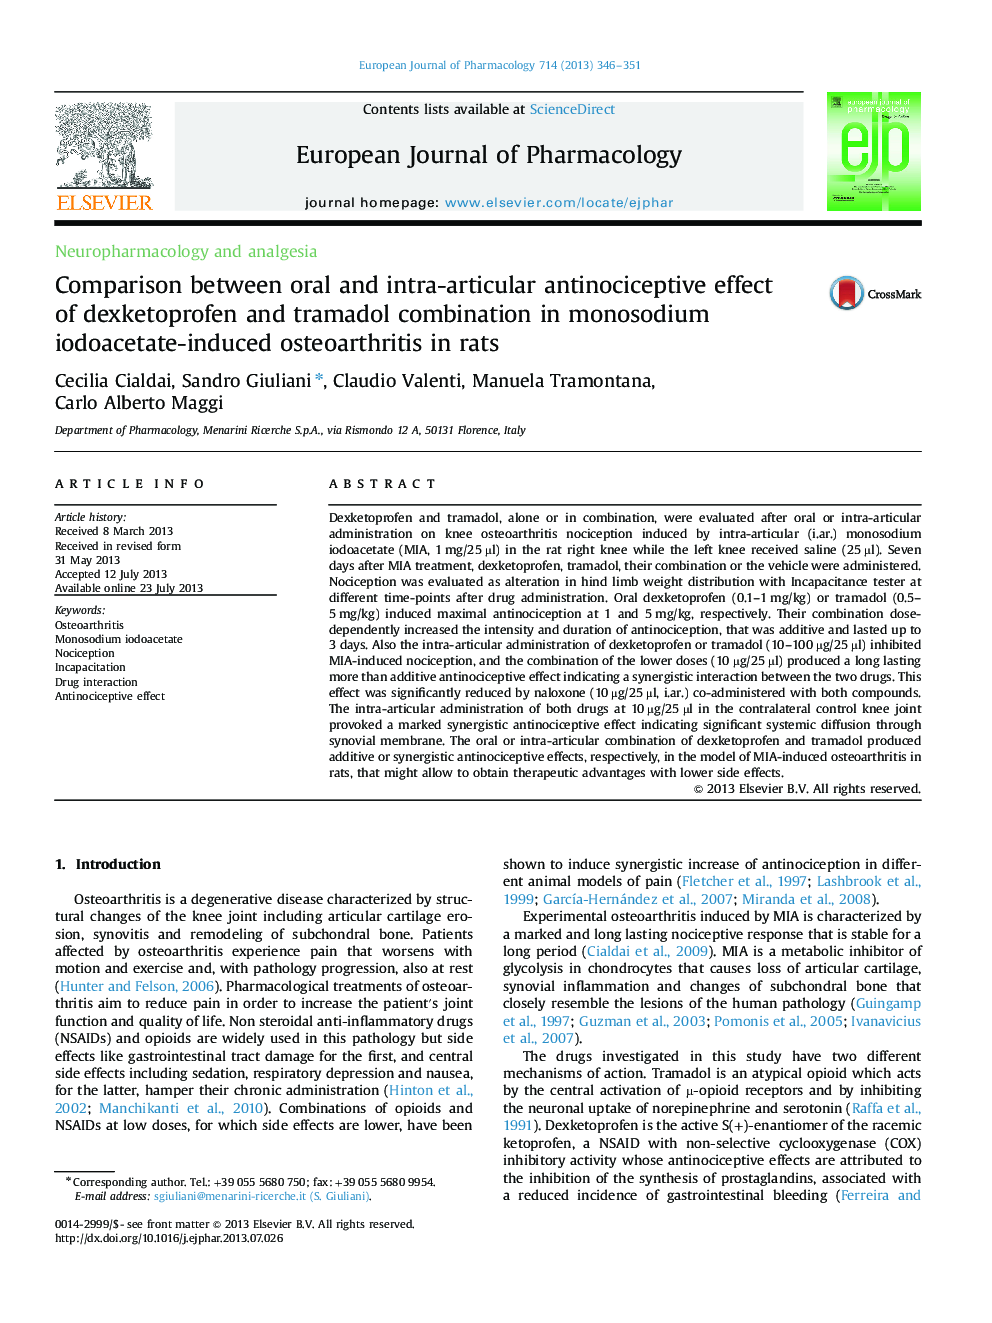 Neuropharmacology and analgesiaComparison between oral and intra-articular antinociceptive effect of dexketoprofen and tramadol combination in monosodium iodoacetate-induced osteoarthritis in rats